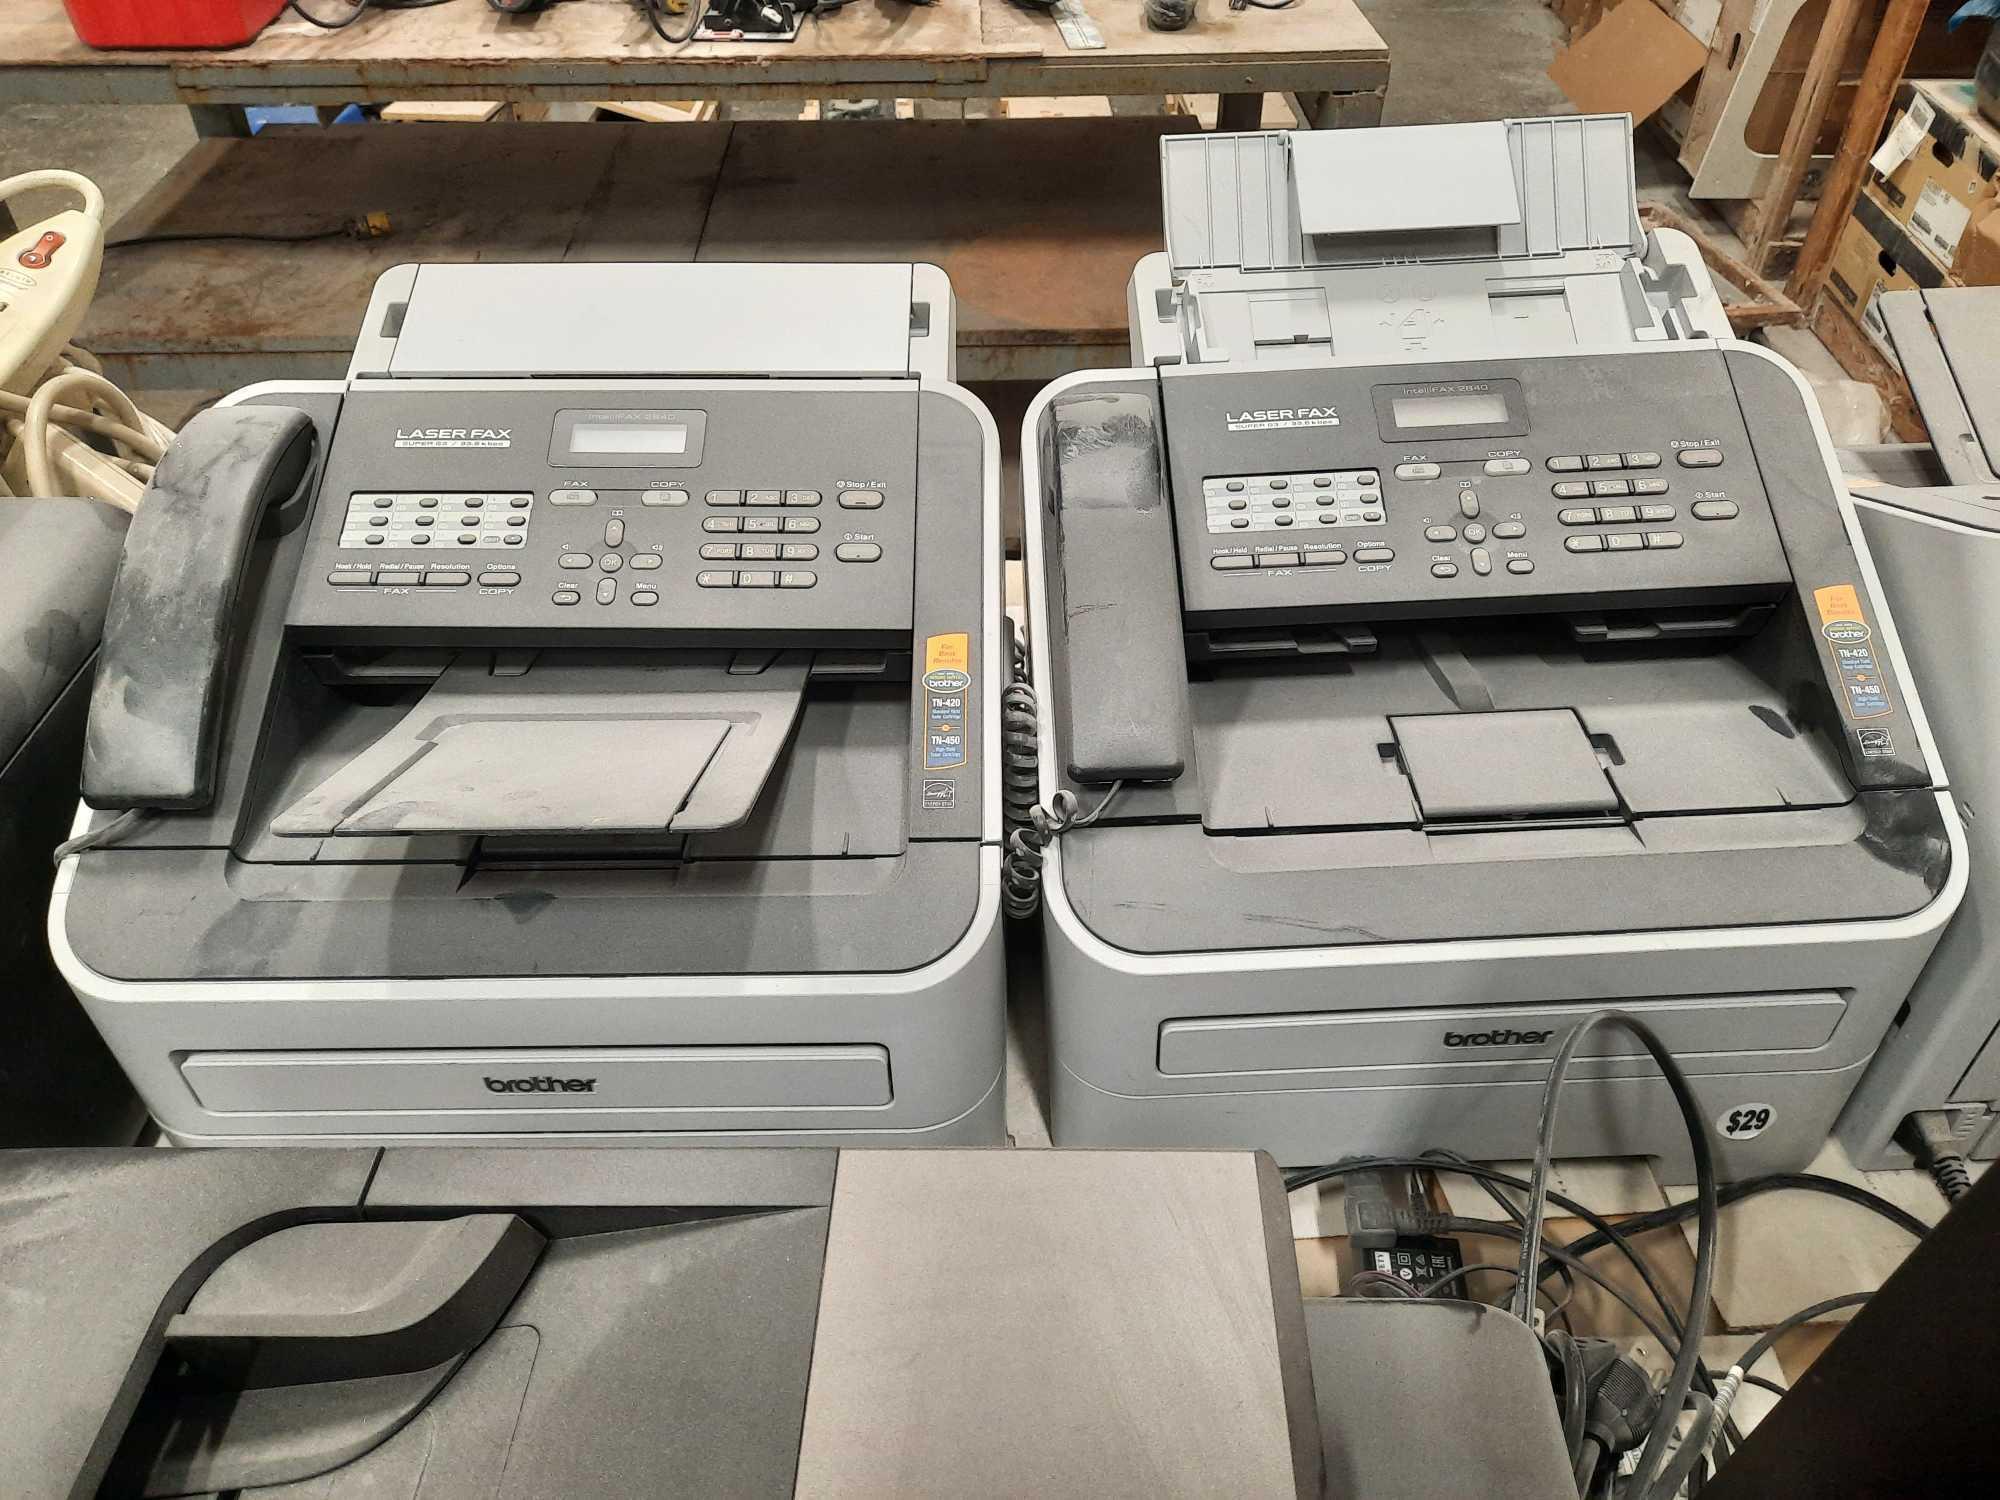 VARIOUS PRINTERS, FAX MACHINES, POWER STRIPS, EXT. CORDS.